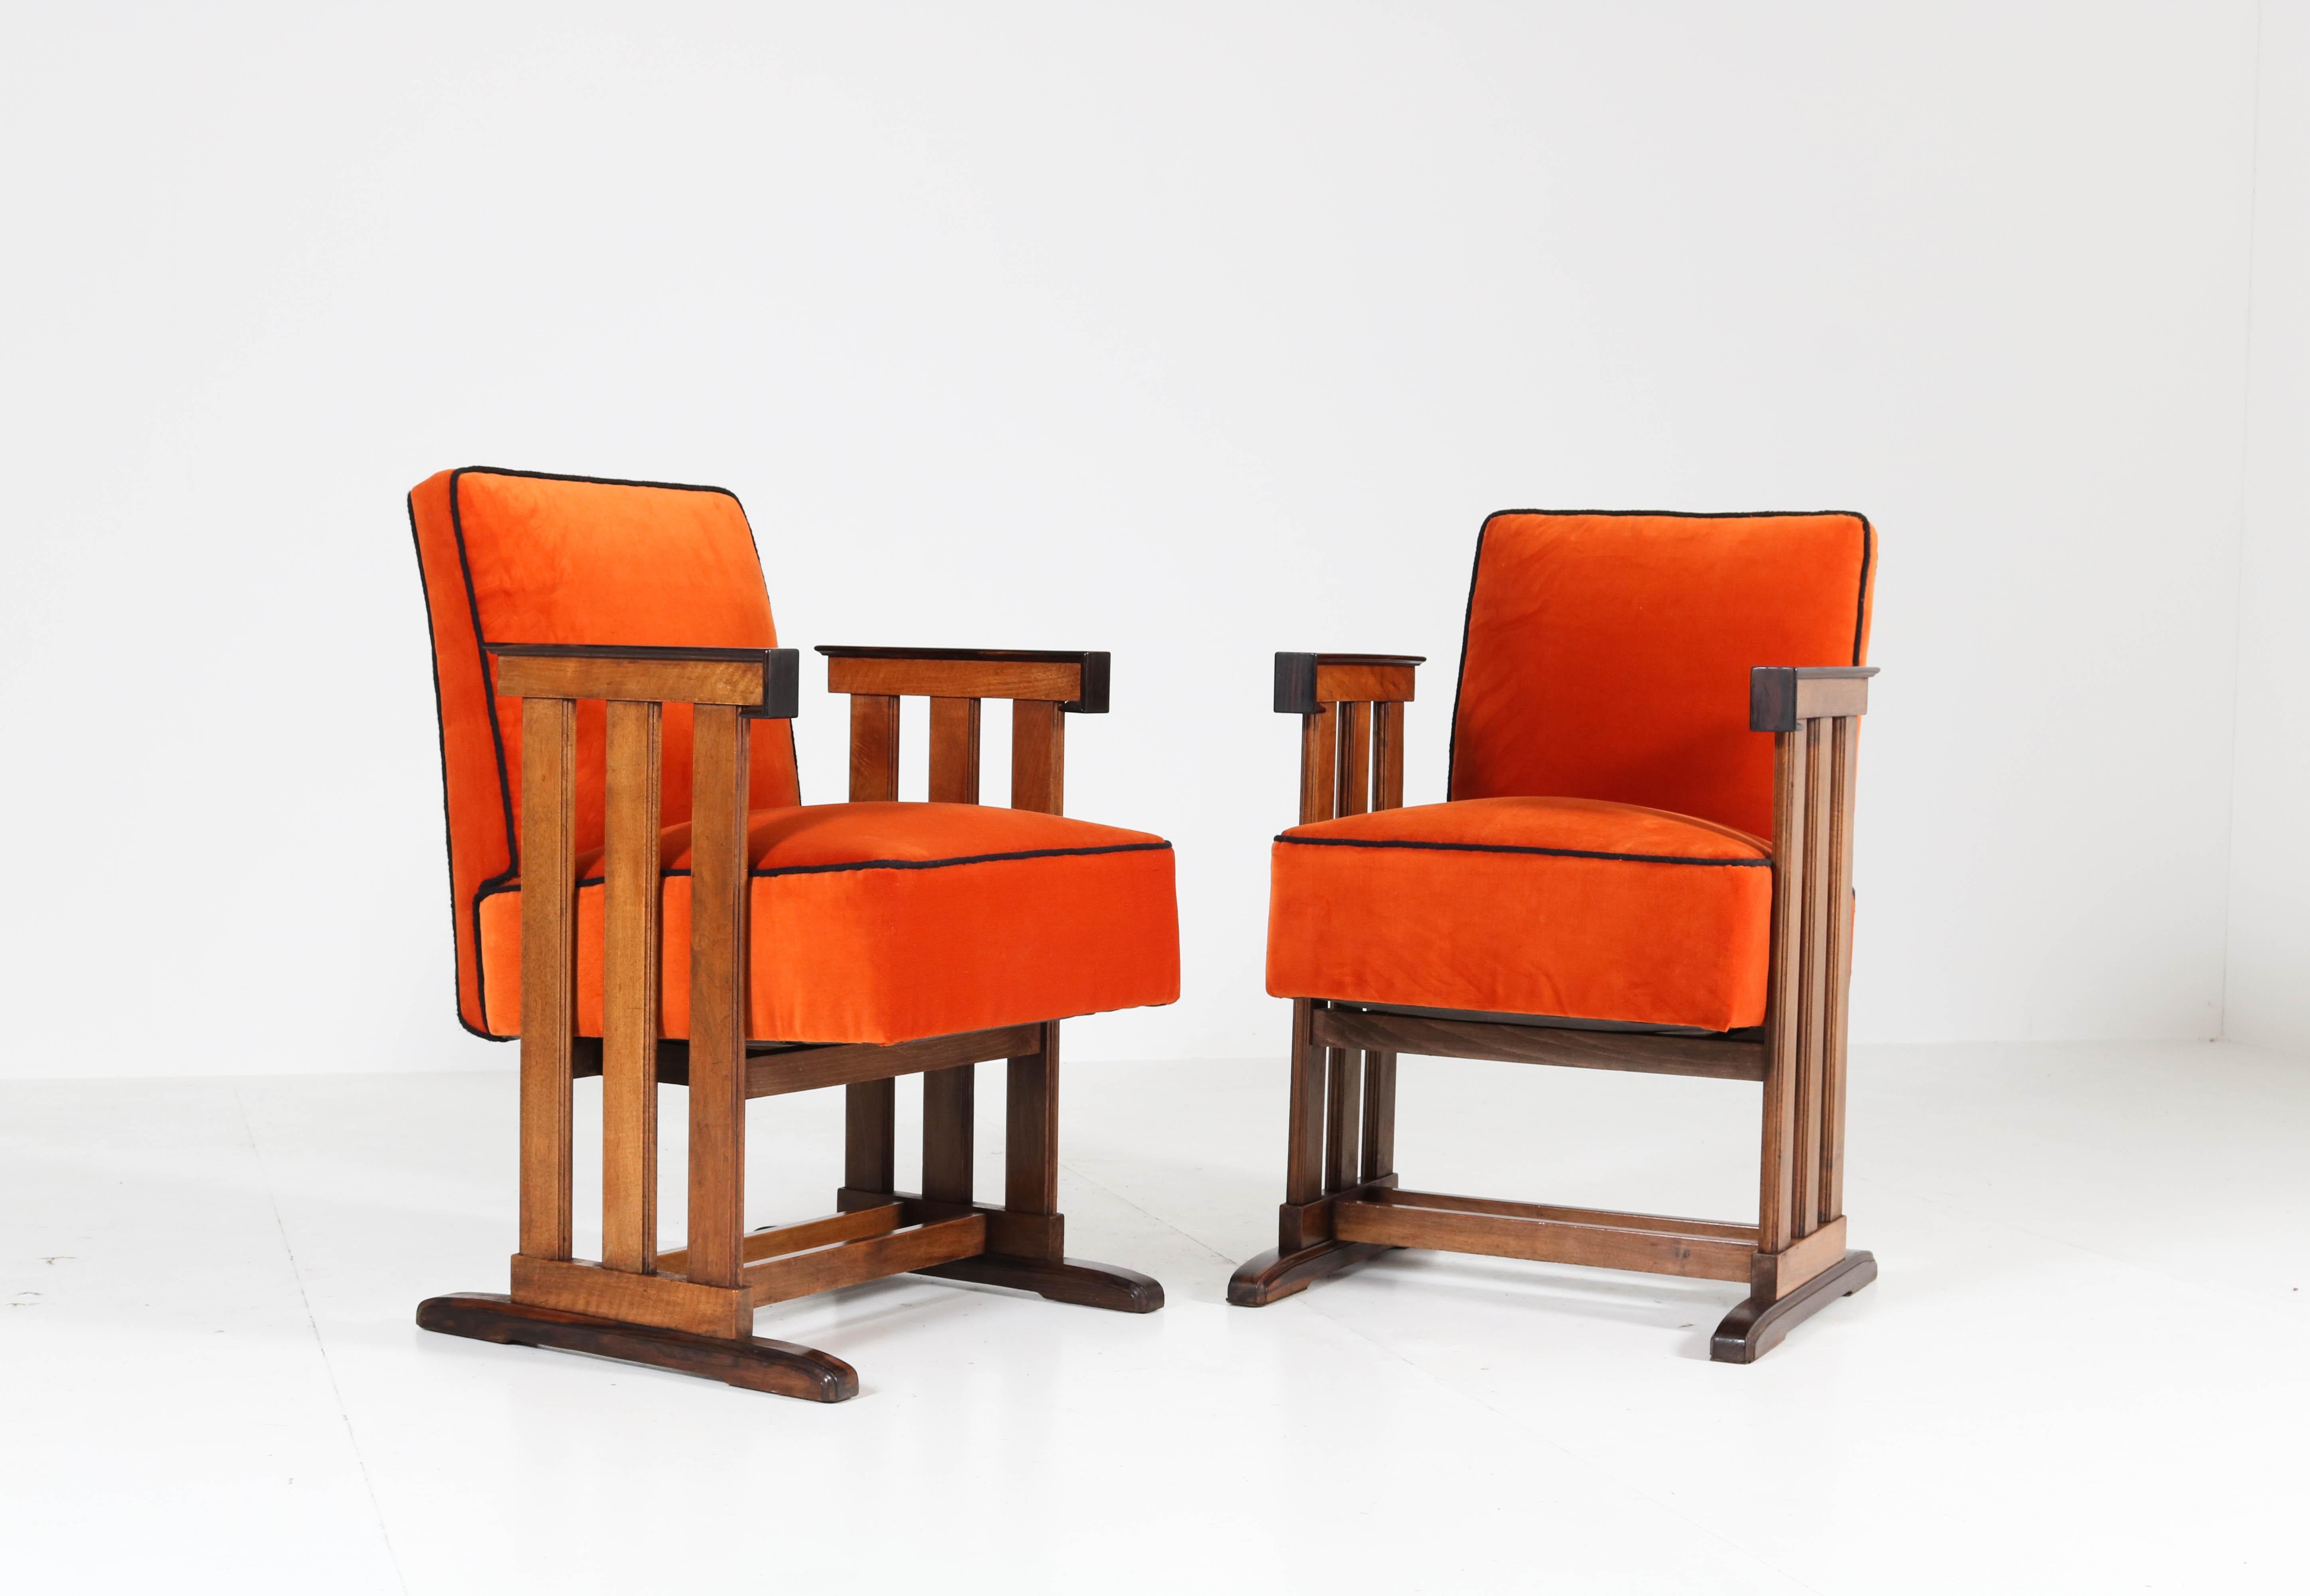 Early 20th Century Walnut Art Deco Amsterdam School Armchairs by 't Woonhuys, 1920s